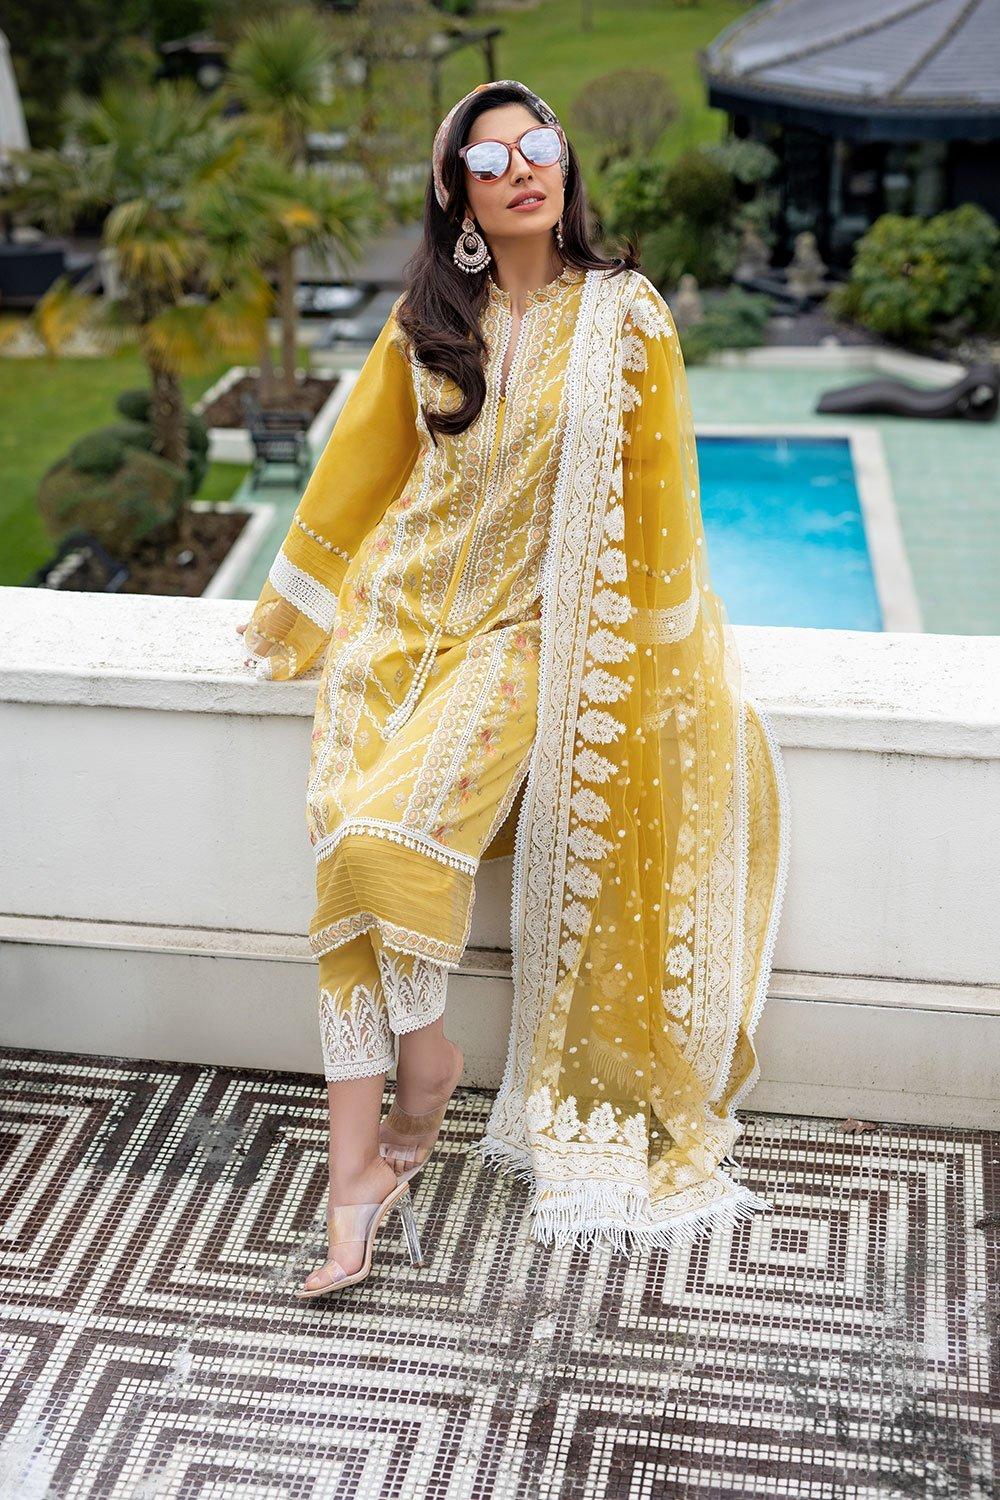 Buy Sobia Nazir’s Luxury Lawn Collection 2021 Yellow Lawn Dress from our website We are largest stockists of Sobia Nazir Lawn 2021 Maria b Pret collection The Pakistani suits are now trending in Mehndi, Party Wear dresses and Bridal Collection Buy dresses pak in Birmingham, UK USA Spain from Lebaasonline in SALE!